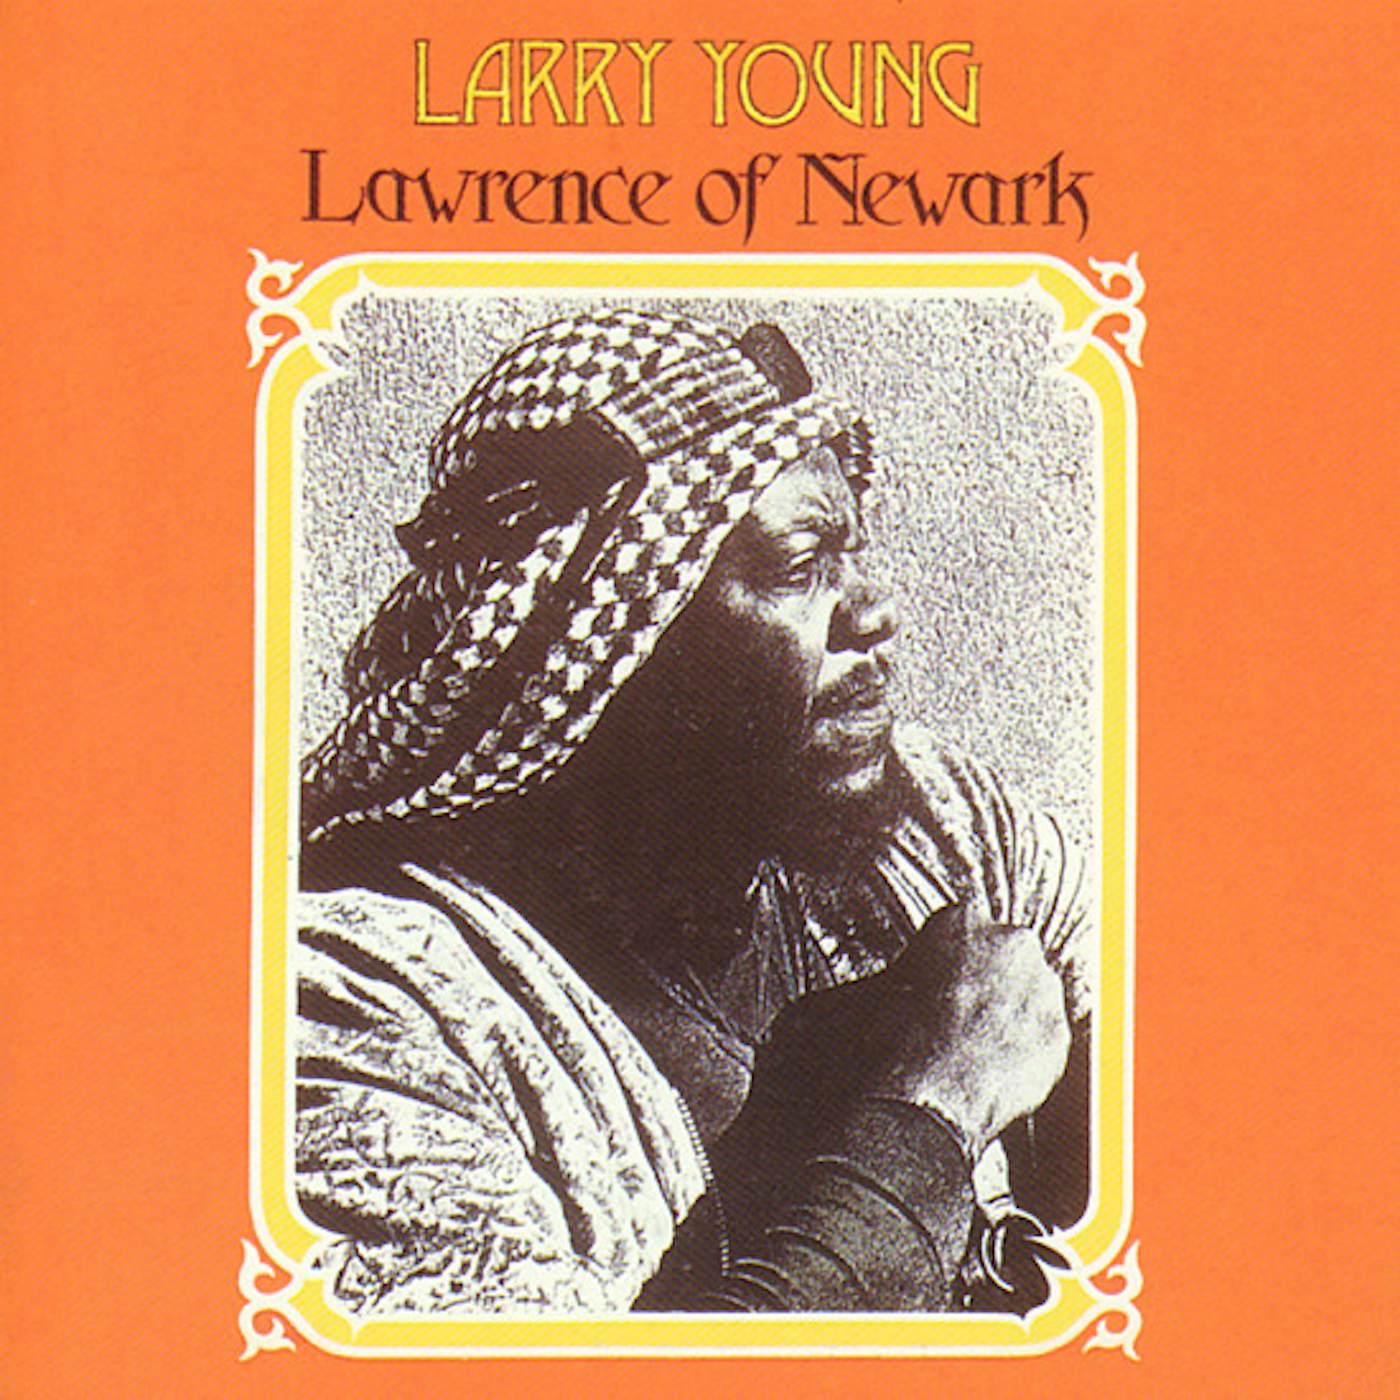 Larry Young LAWRENCE OF NEWARK Vinyl Record